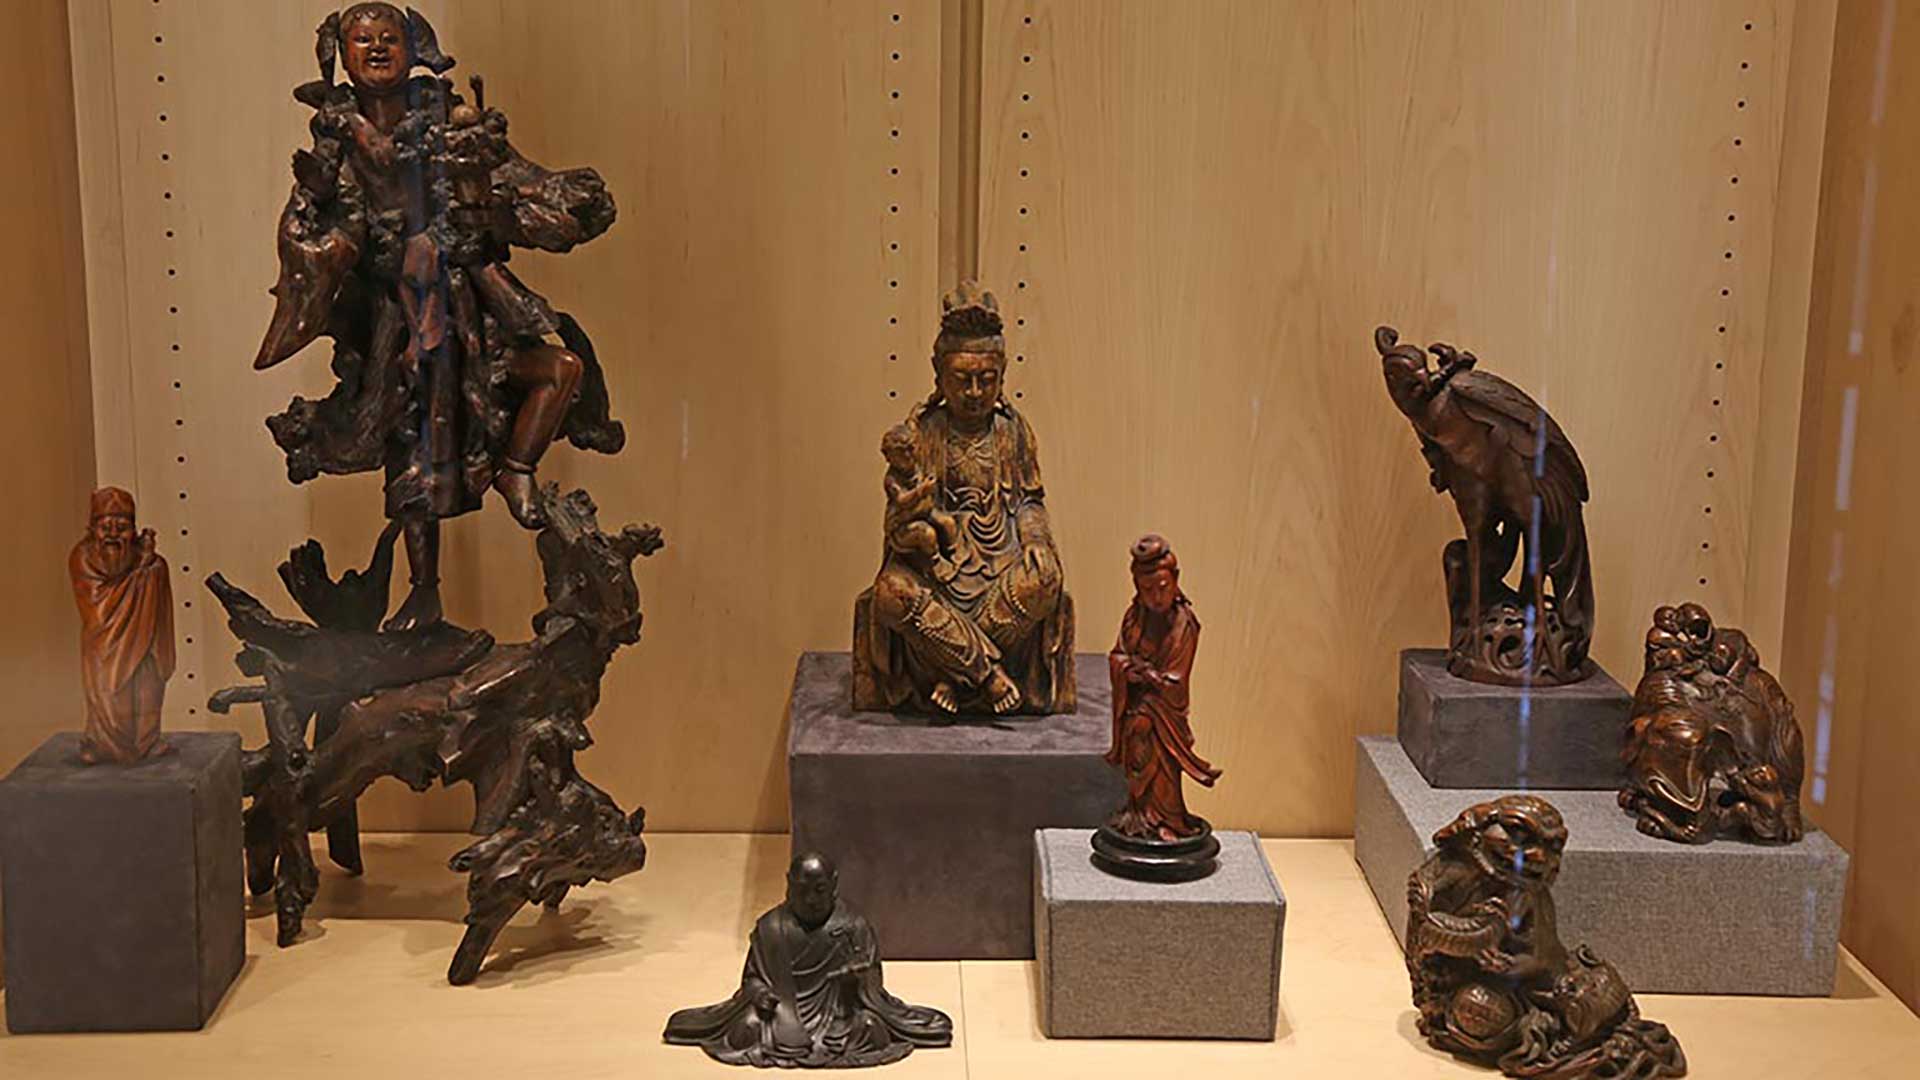 a shot that shows the many sculptures in one display case